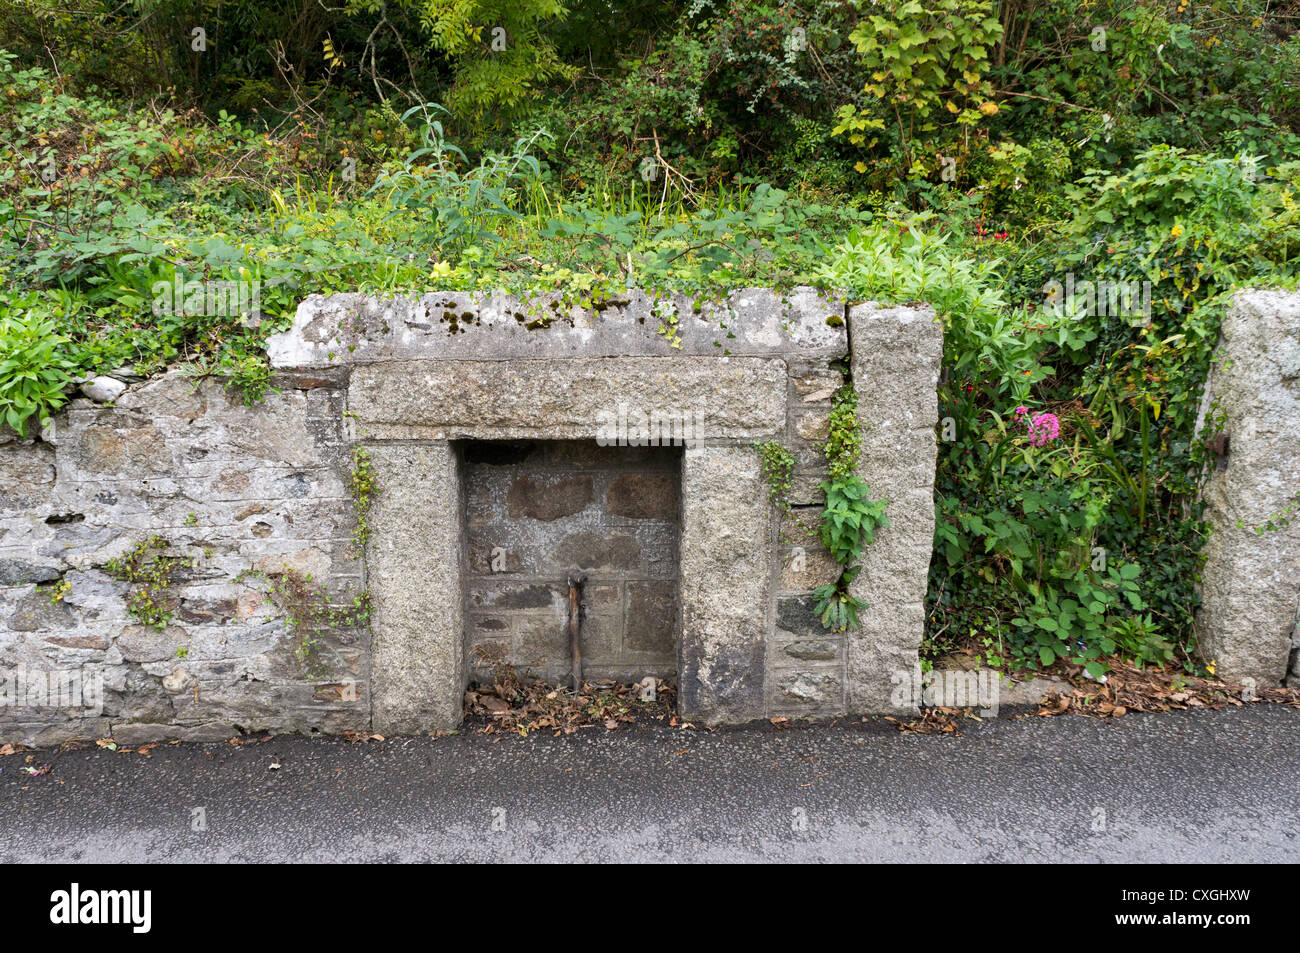 Old granite structure with remains of standpipe Stock Photo